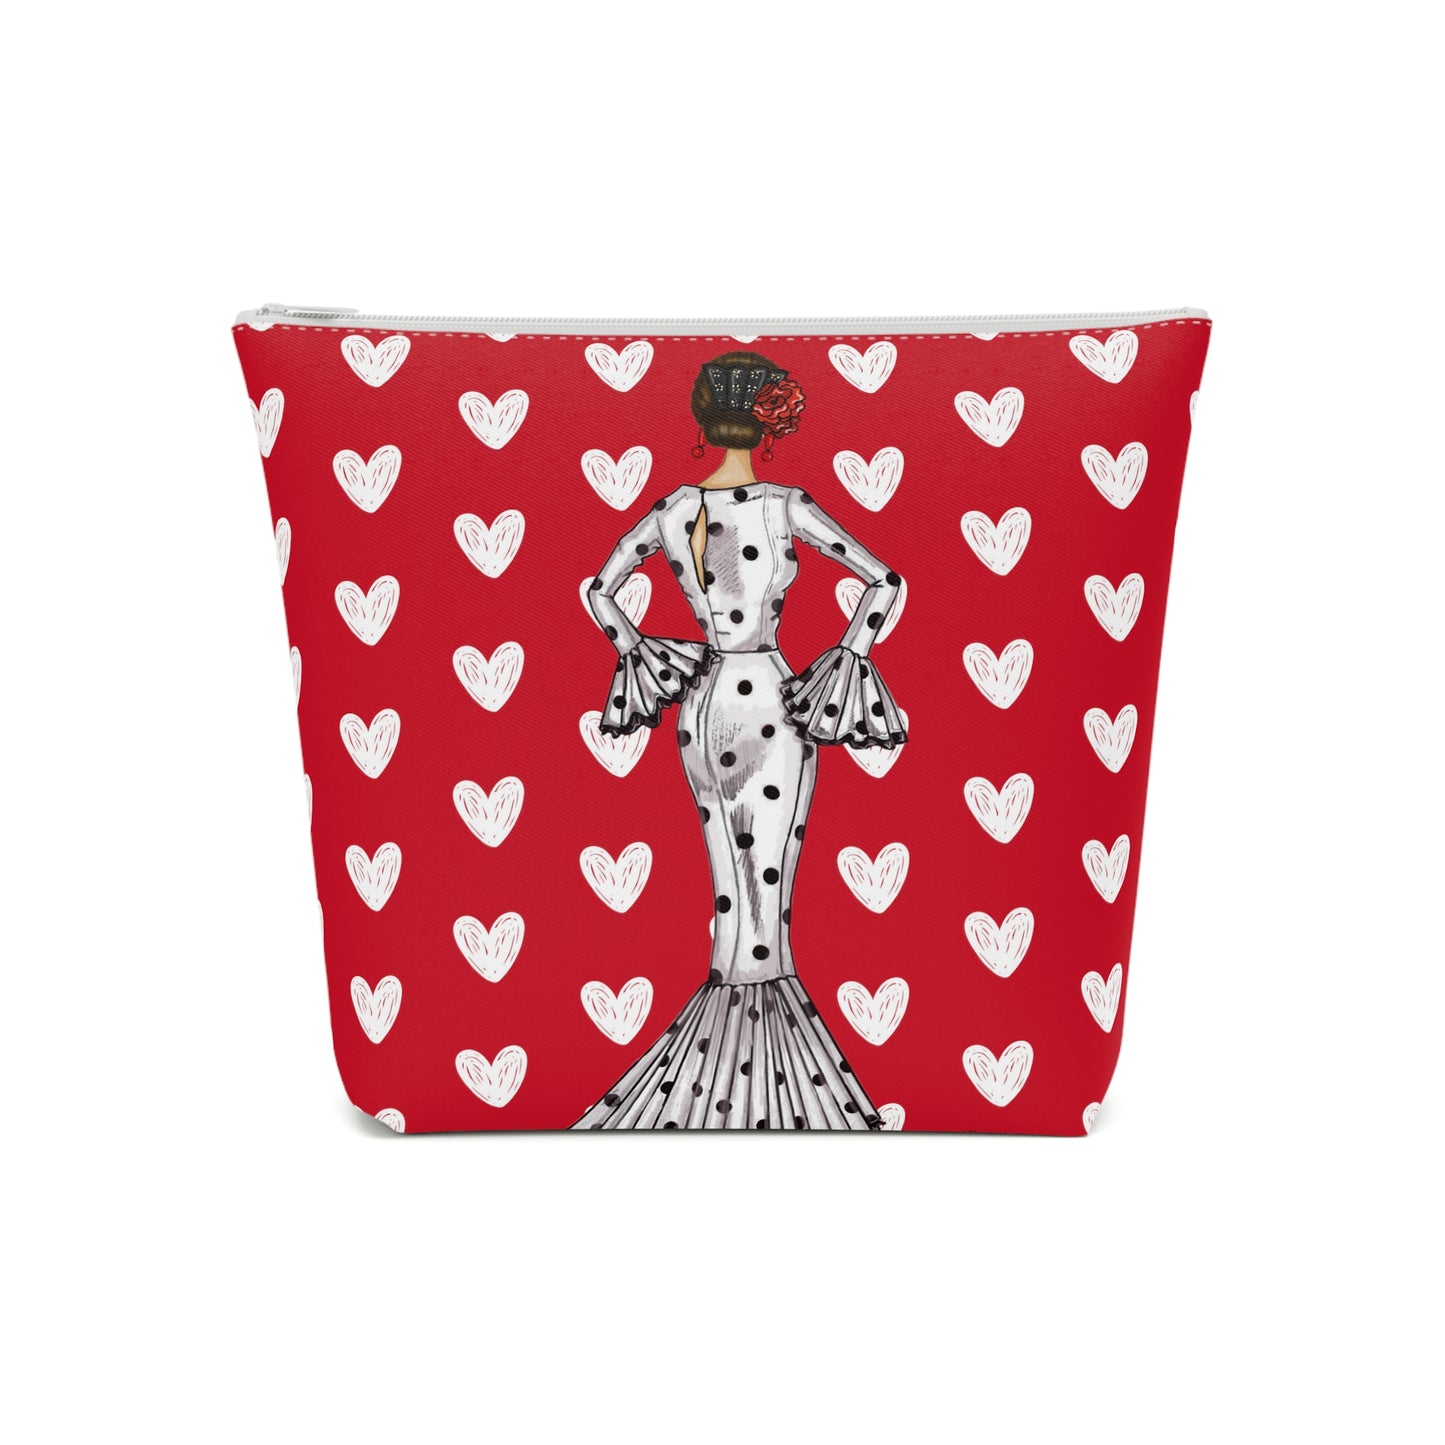 a red bag with a dalmatian girl on it